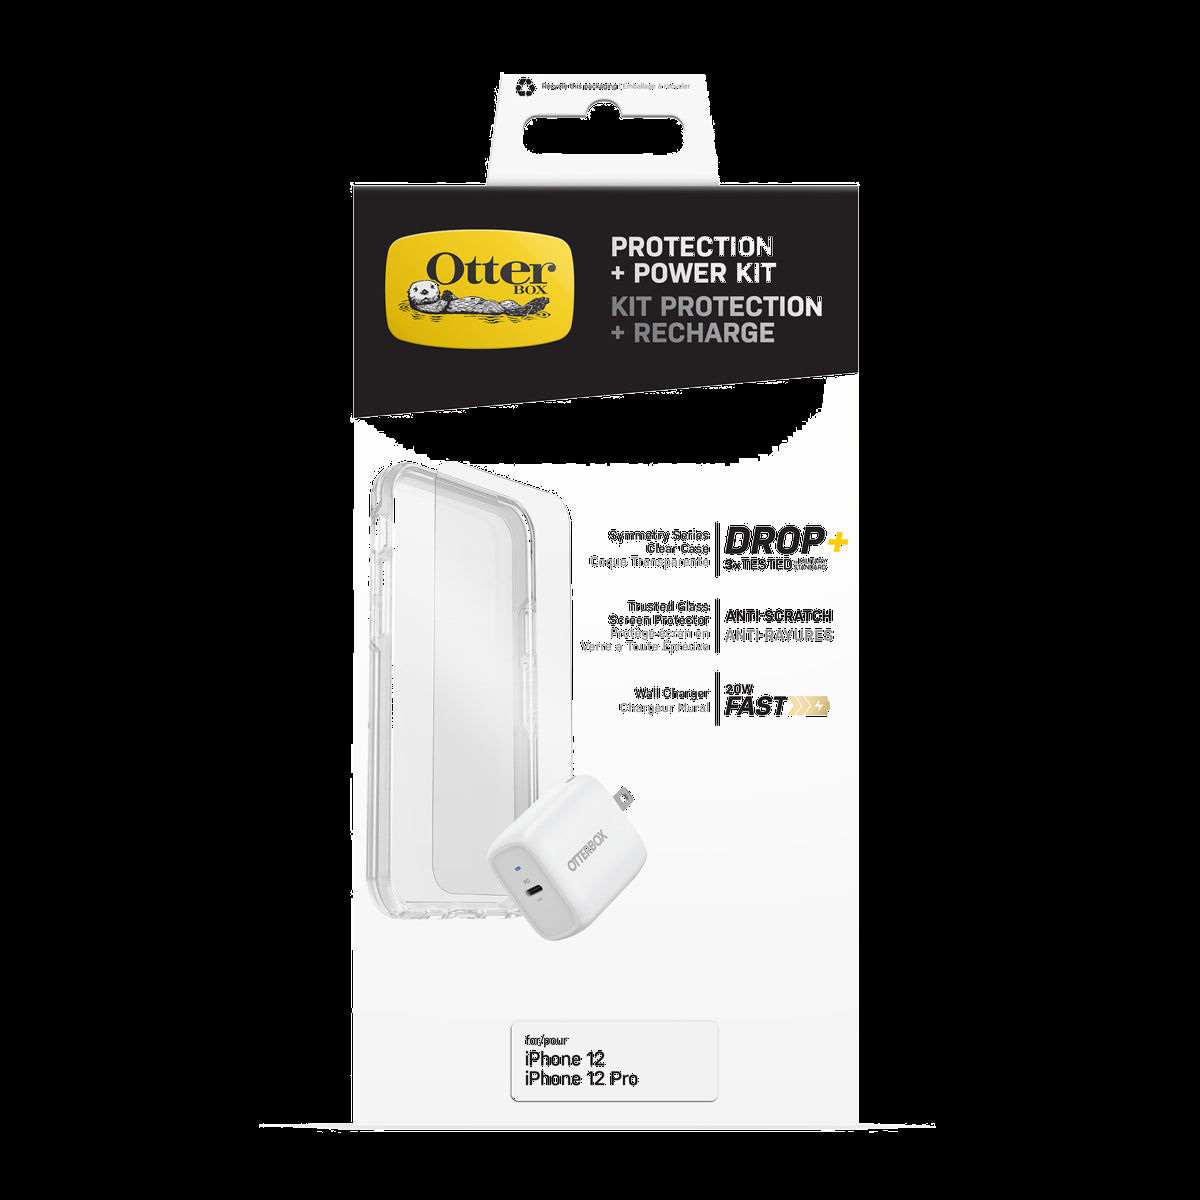 <p>Get 360° protection and power all in one bundle with the OtterBox Protection + Power Kit which includes a Symmetry Series Clear case, a Trusted Glass Screen Protector and a 20W Wall Charger.</p>